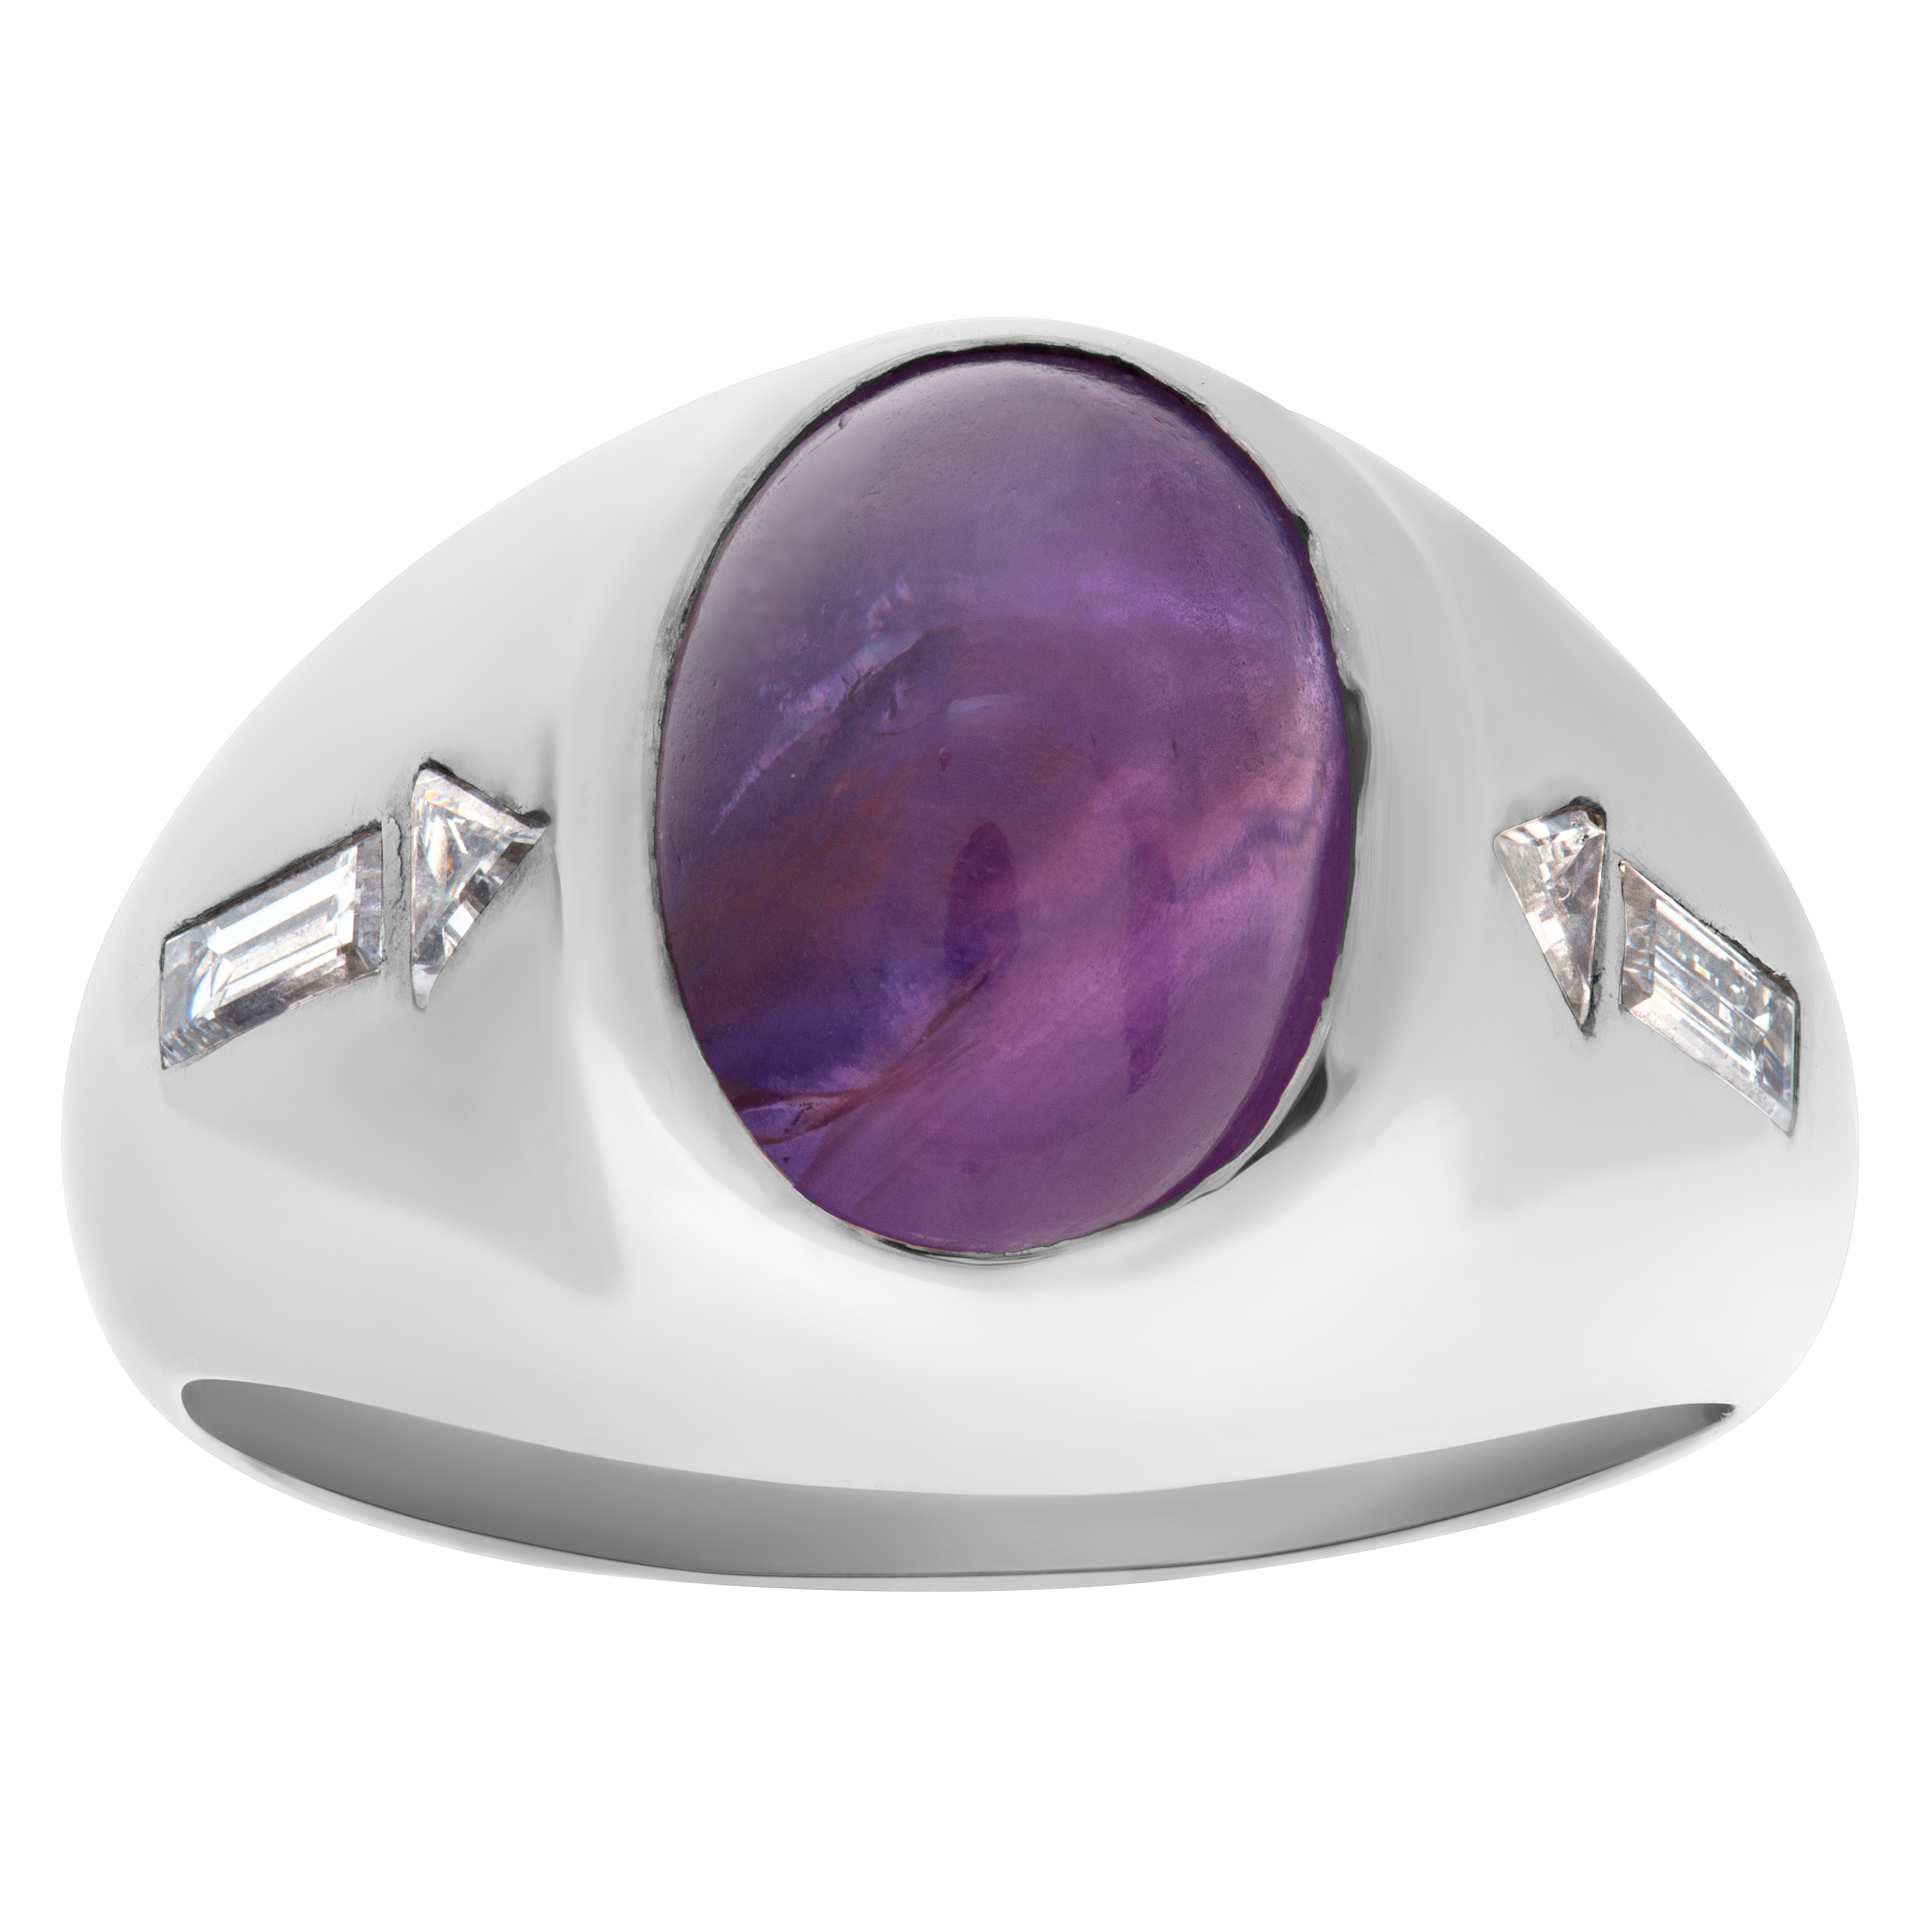 Star sapphire ring with diamond accents in 14k white gold. 2.00 cts sapphire cabochon image 1